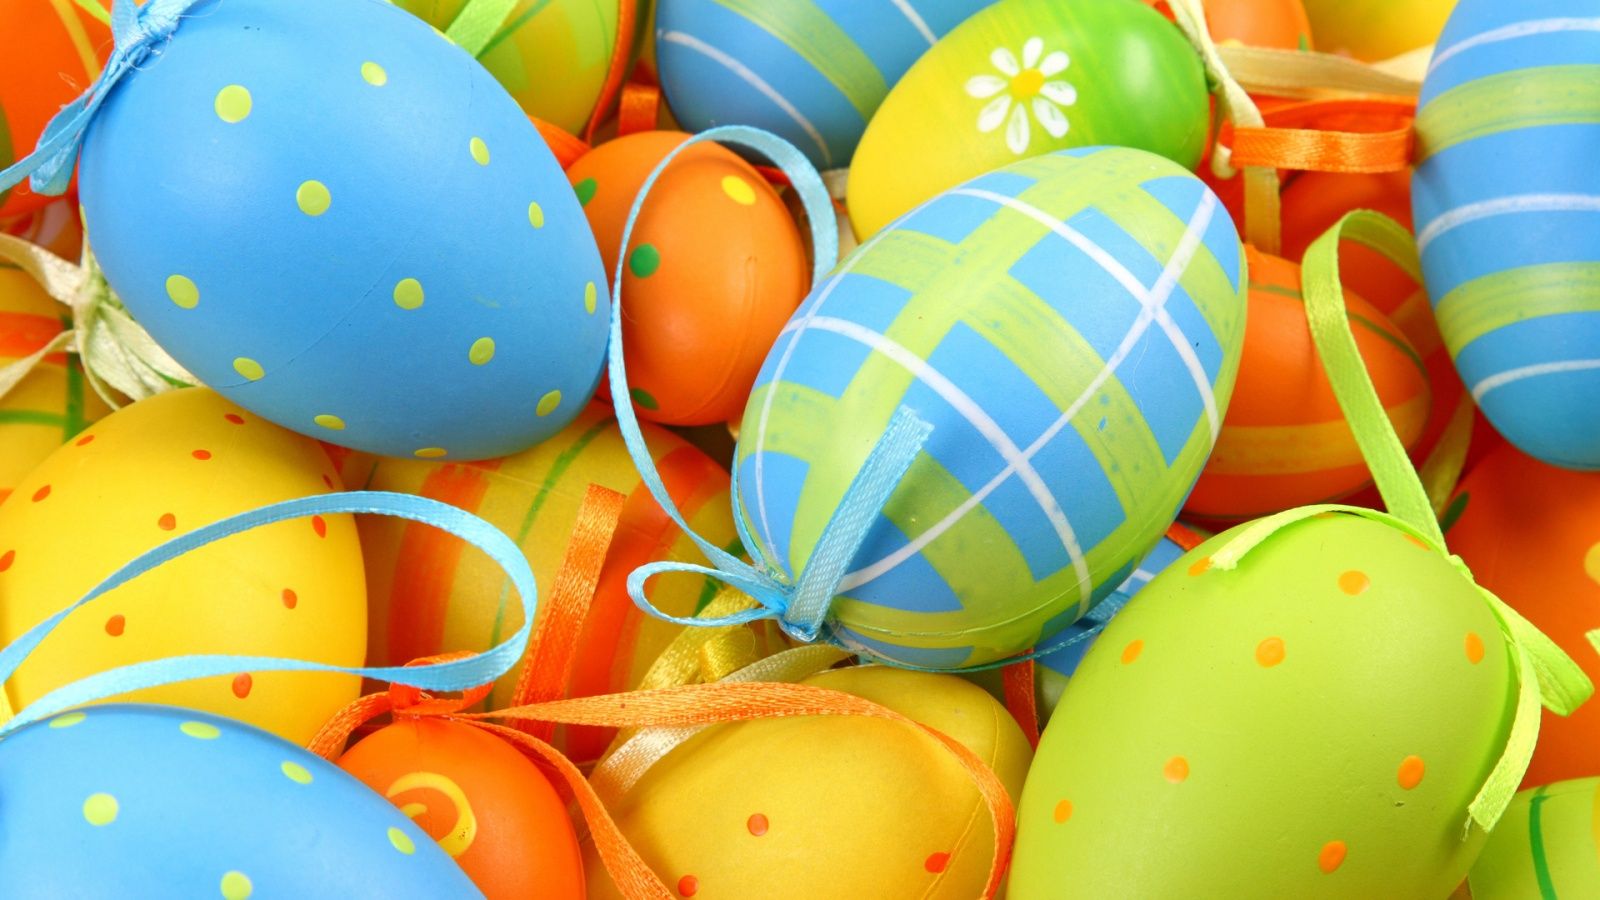 HD wallpaper, Colorful, Eggs, Easter